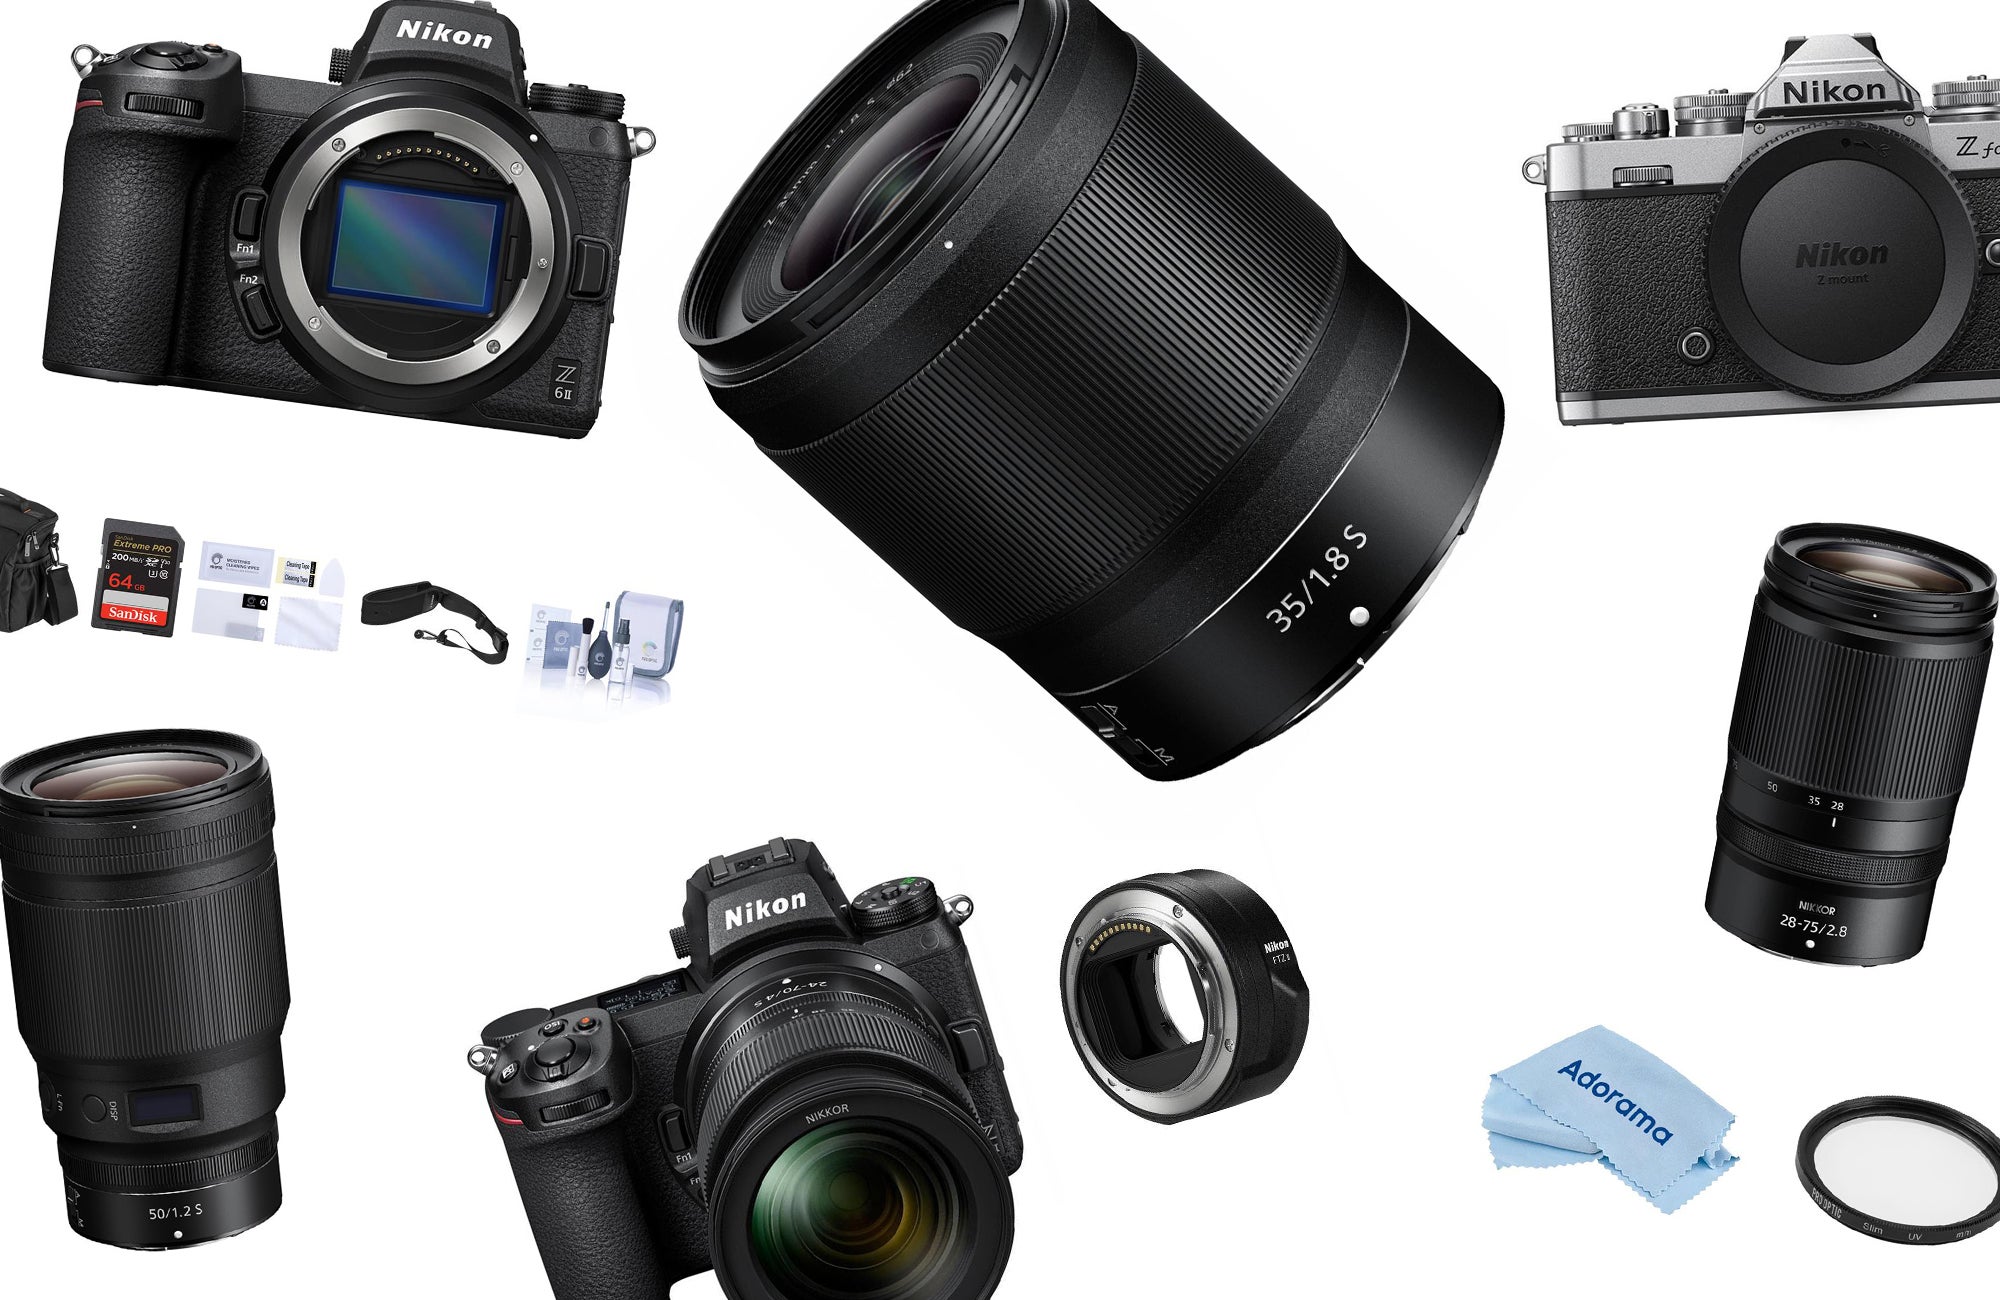 Nikon Z6 II Mirrorless Camera with 28-75mm f/2.8 Lens and Accessories Kit